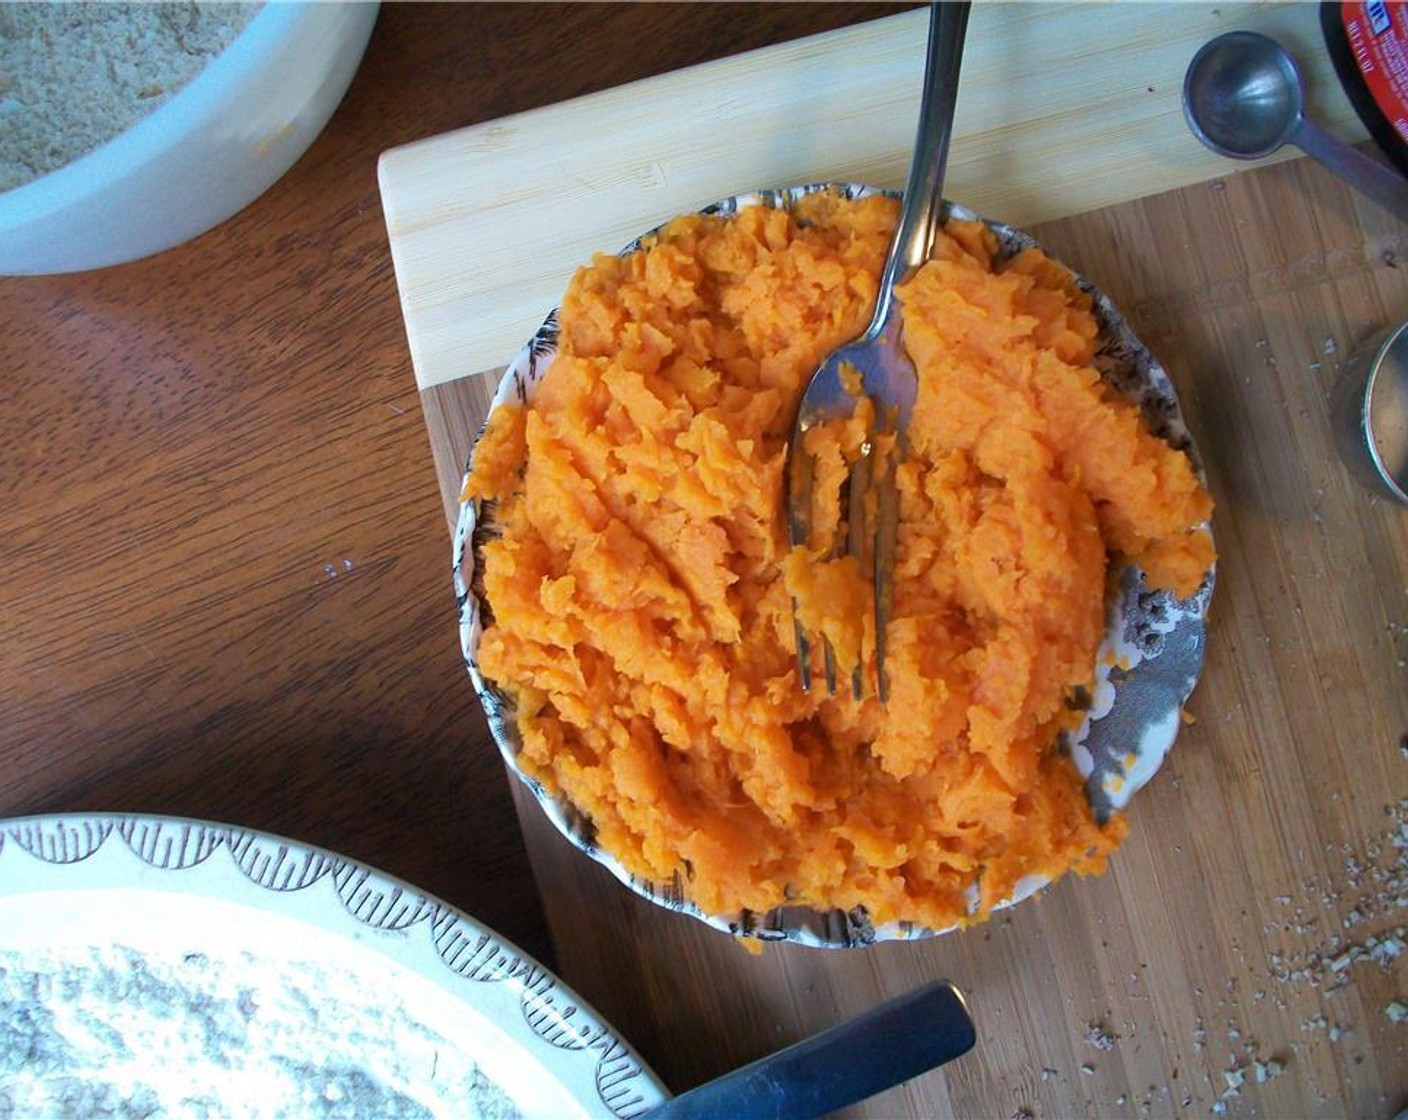 step 3 In a separate bowl, combine mashed Sweet Potato (1 cup), Granulated Sugar (1/4 cup), Brown Sugar (1/4 cup) and Vanilla Extract (1/2 tsp).